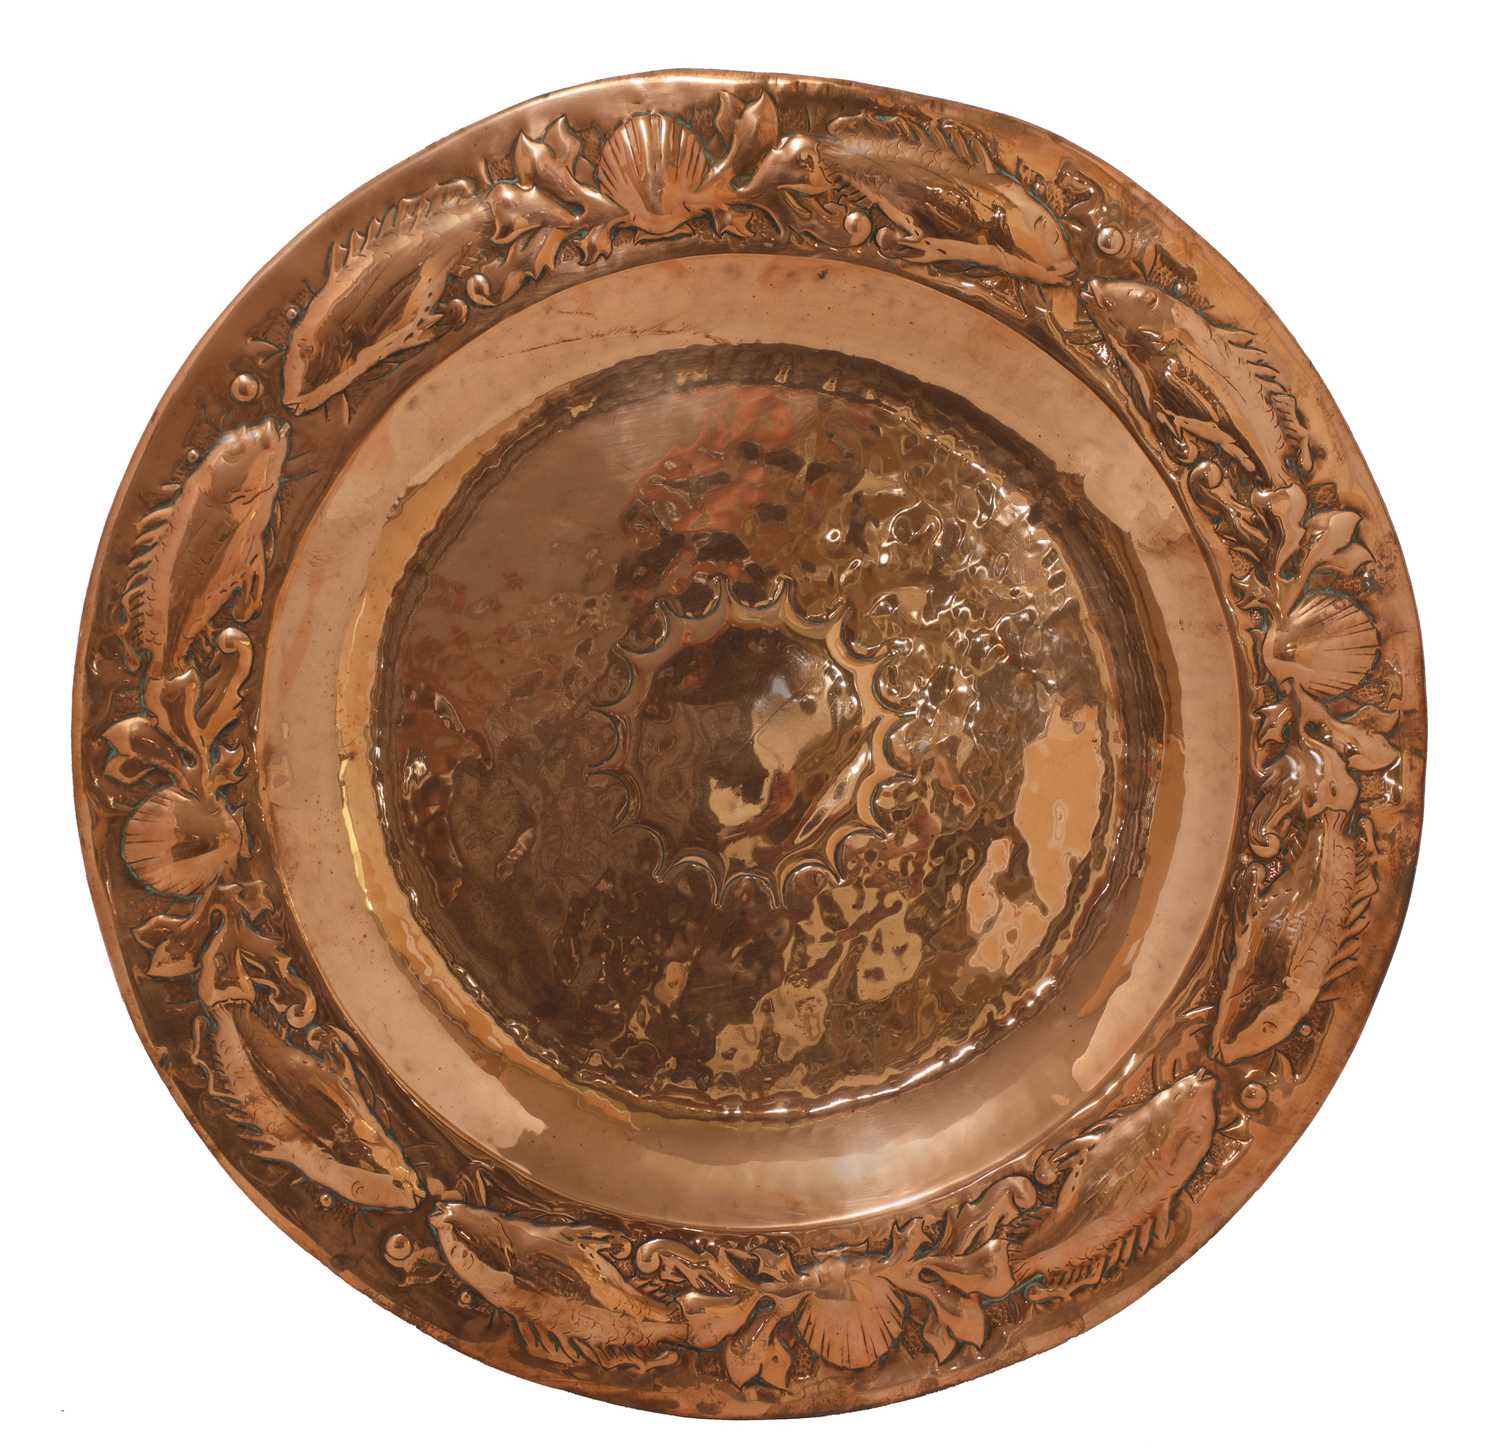 Lot 152 - An Arts and Crafts circular copper charger